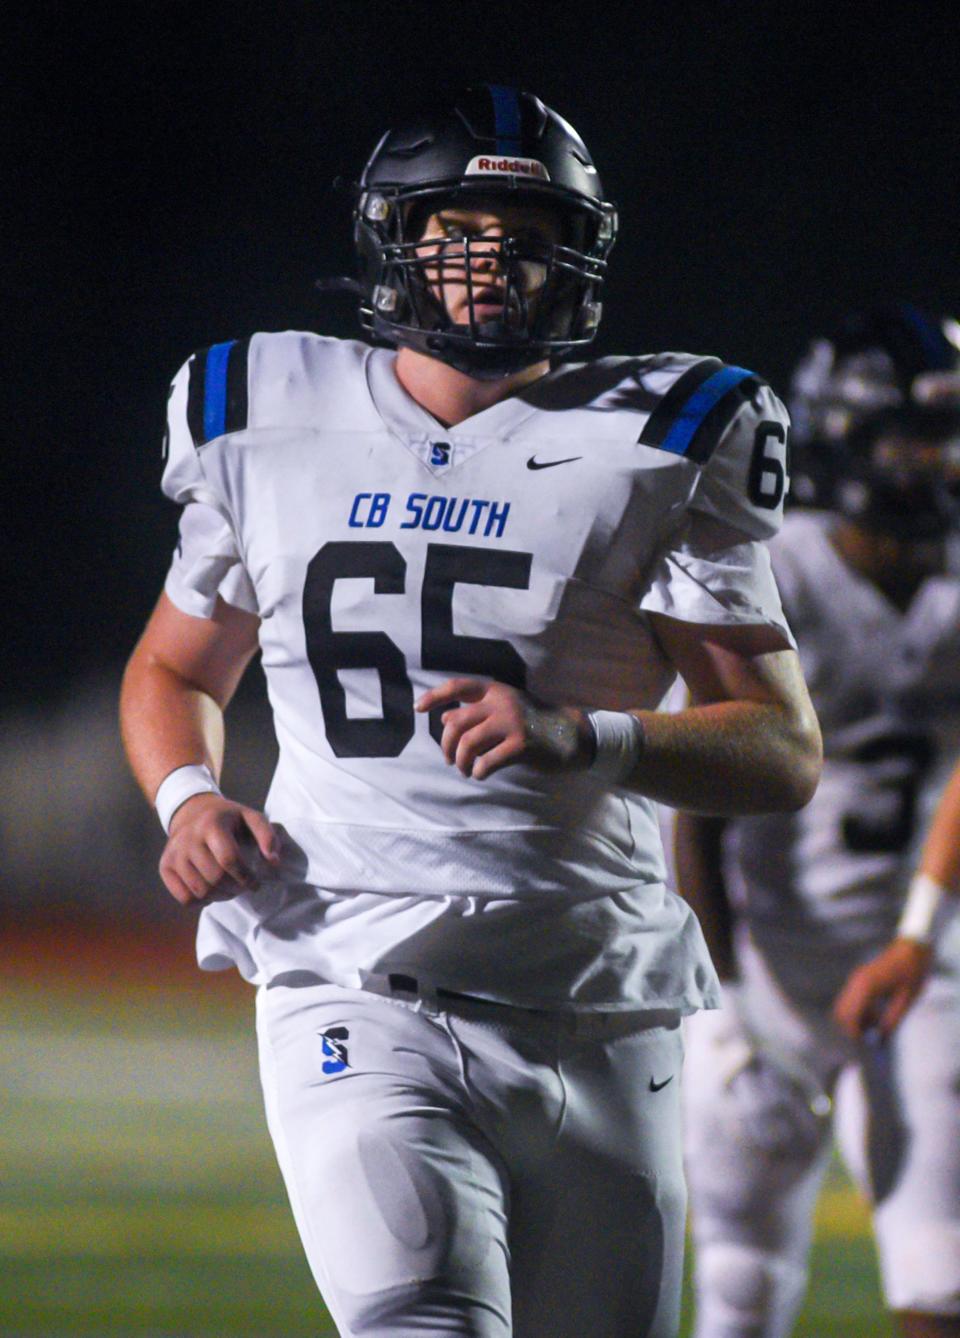 Central Bucks South's Collin Goetter has helped anchor the Titans' offensive line for three seasons.